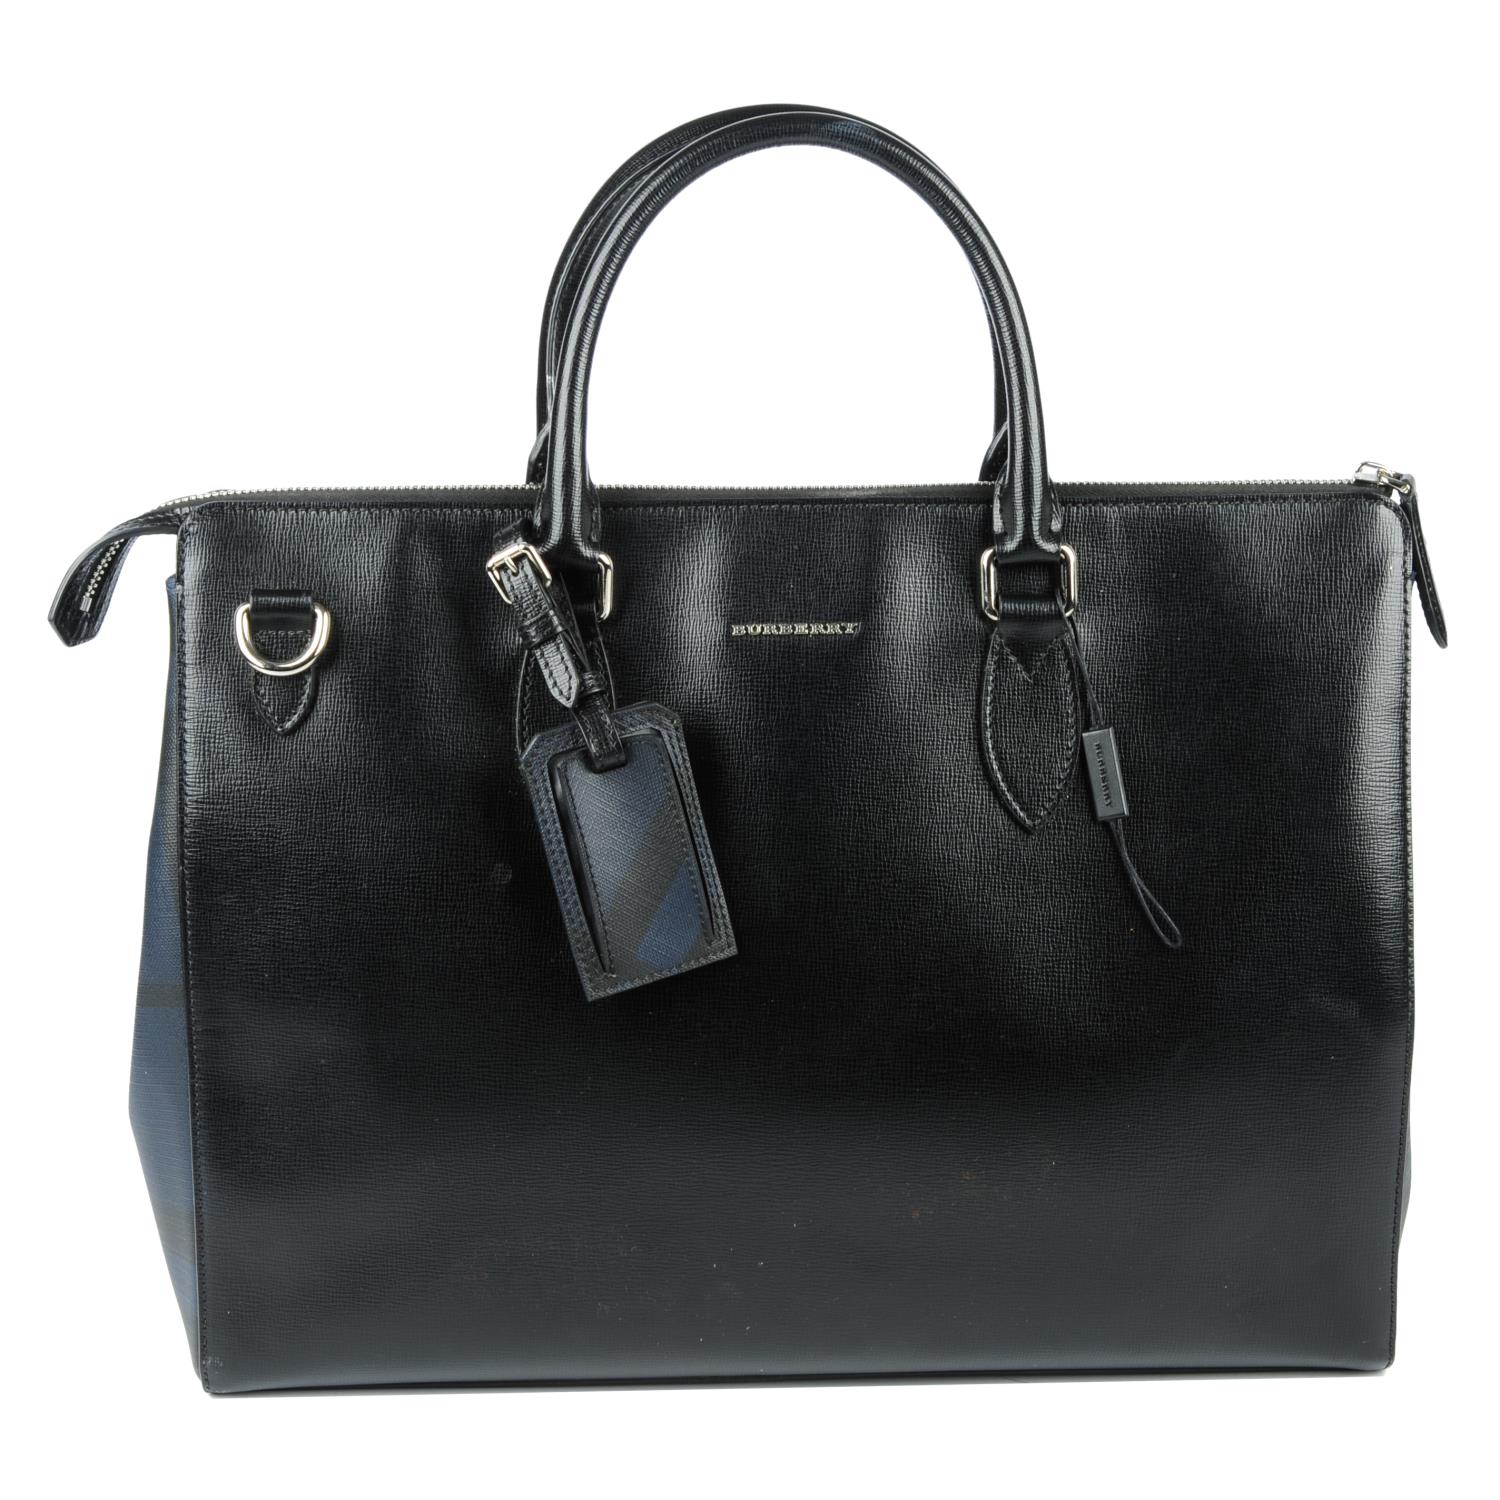 BURBERRY - a black leather London briefcase.